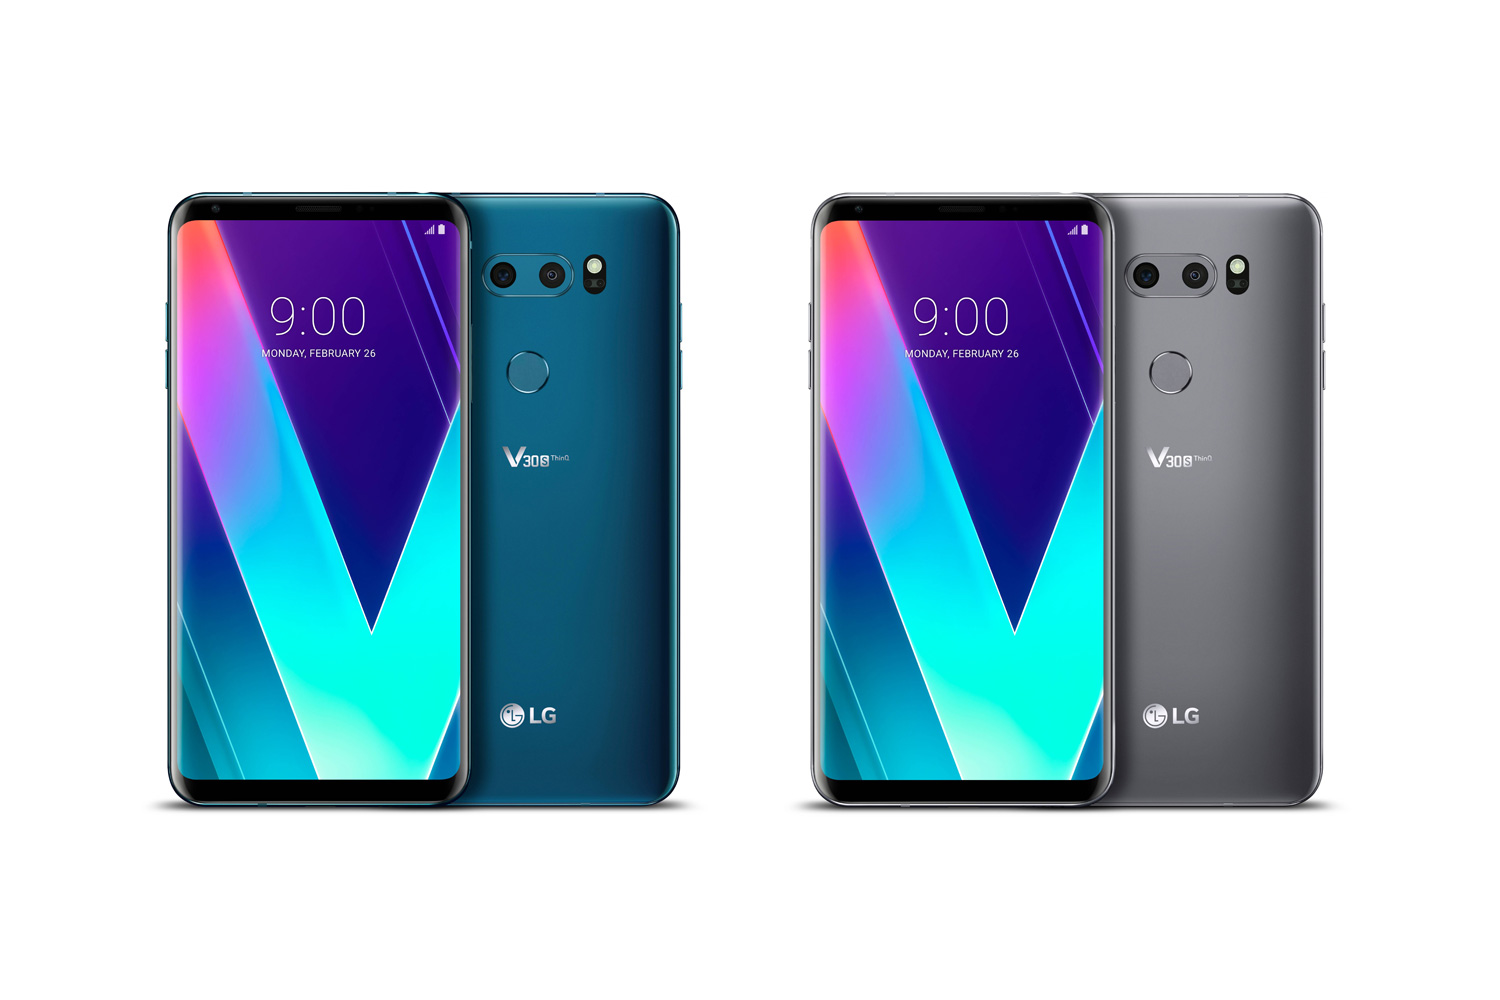 MWC 2018: LG V30S ThinQ Officially Announced with New Integrated AI